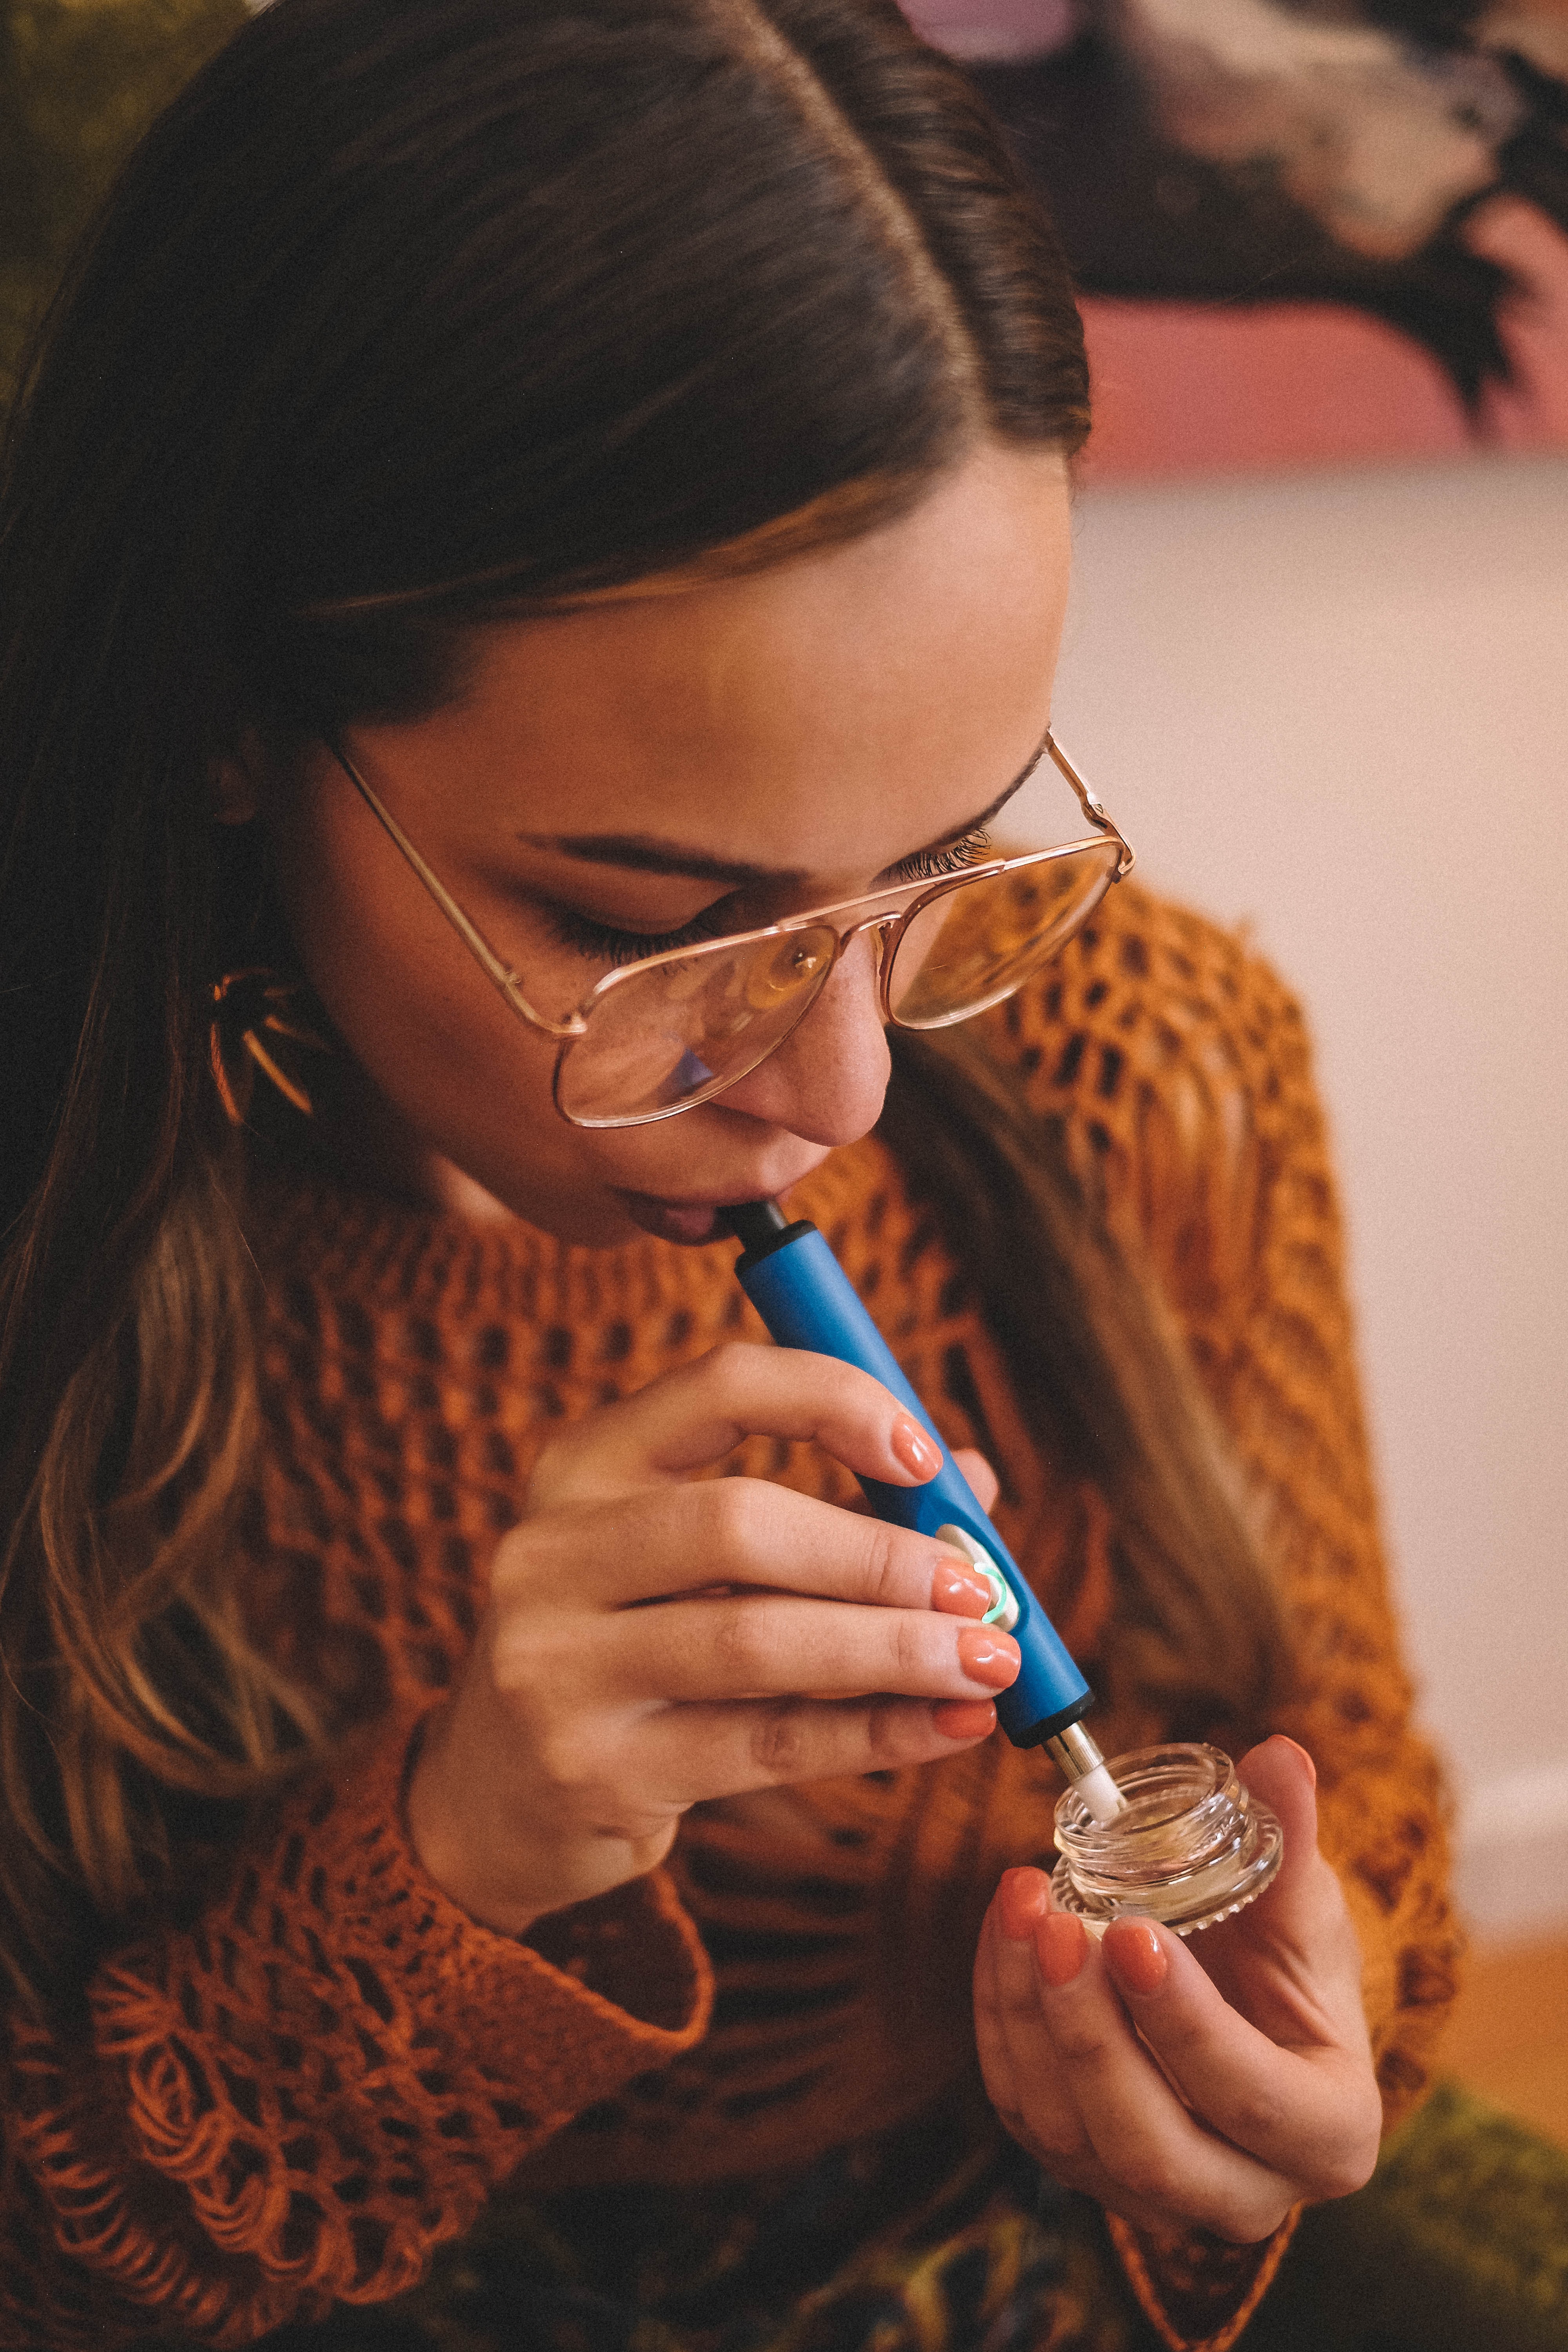 Dabbing and the Entourage Effect: How Terpenes Influence the Experience